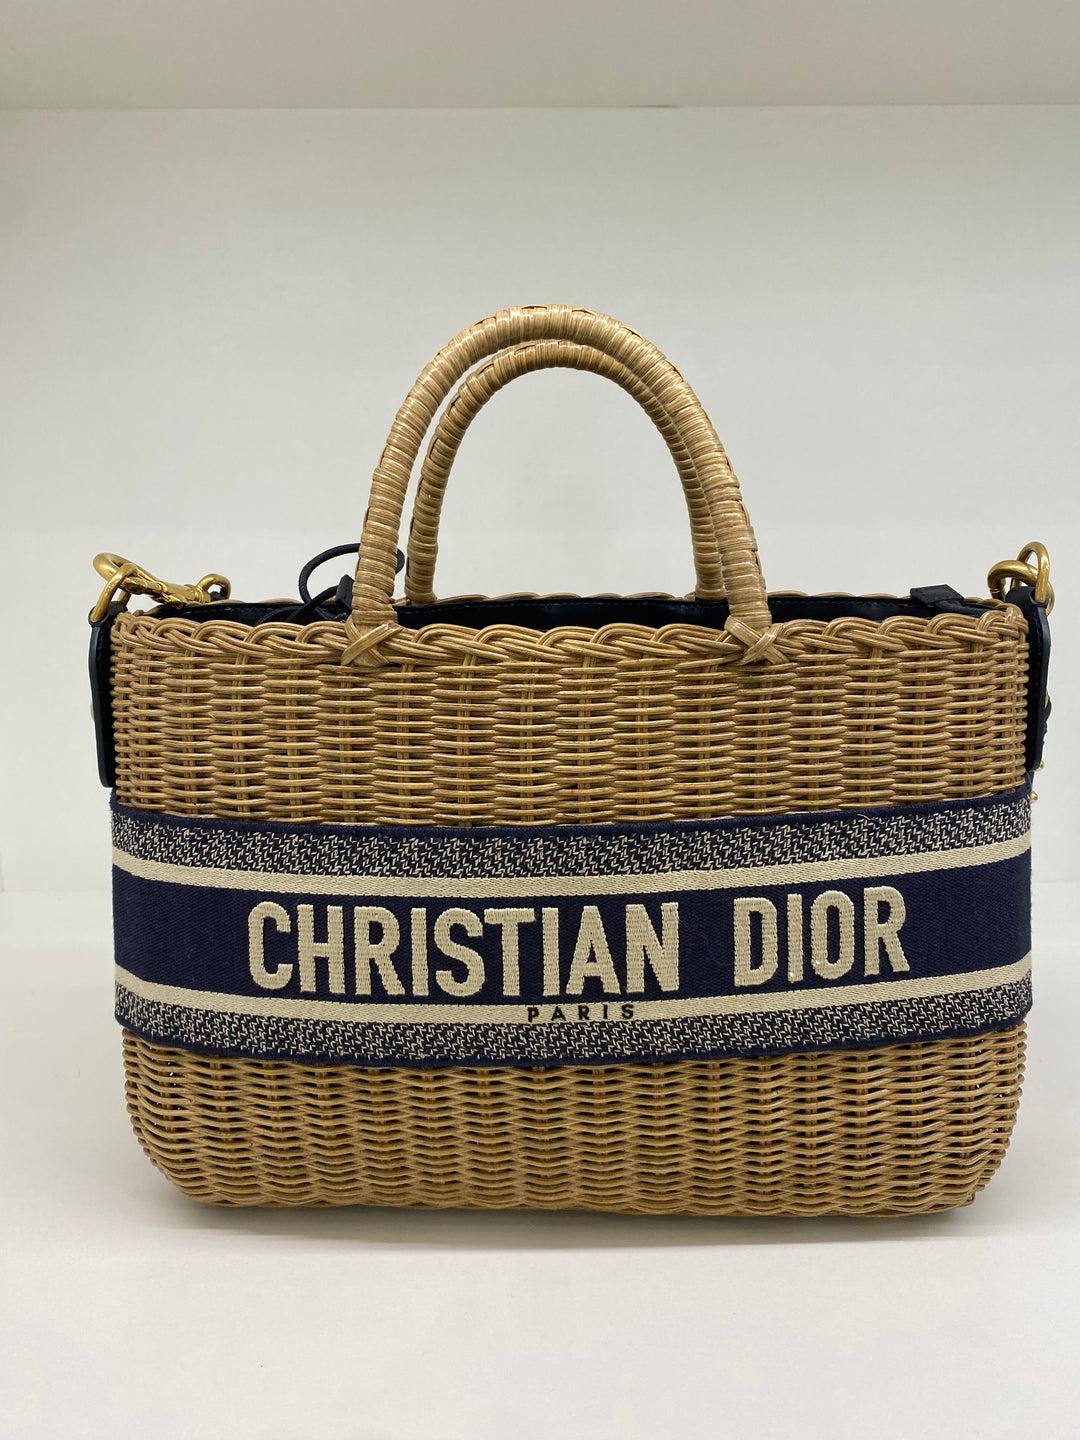 Marc Bohan’s iconic Oblique pattern debuted in 1967. Reintroduced in almost every collection, Christian Dior’s signature motif is presented in the interior pouch of this basket bag. It's finished with a jacquard logo motif for an instantly